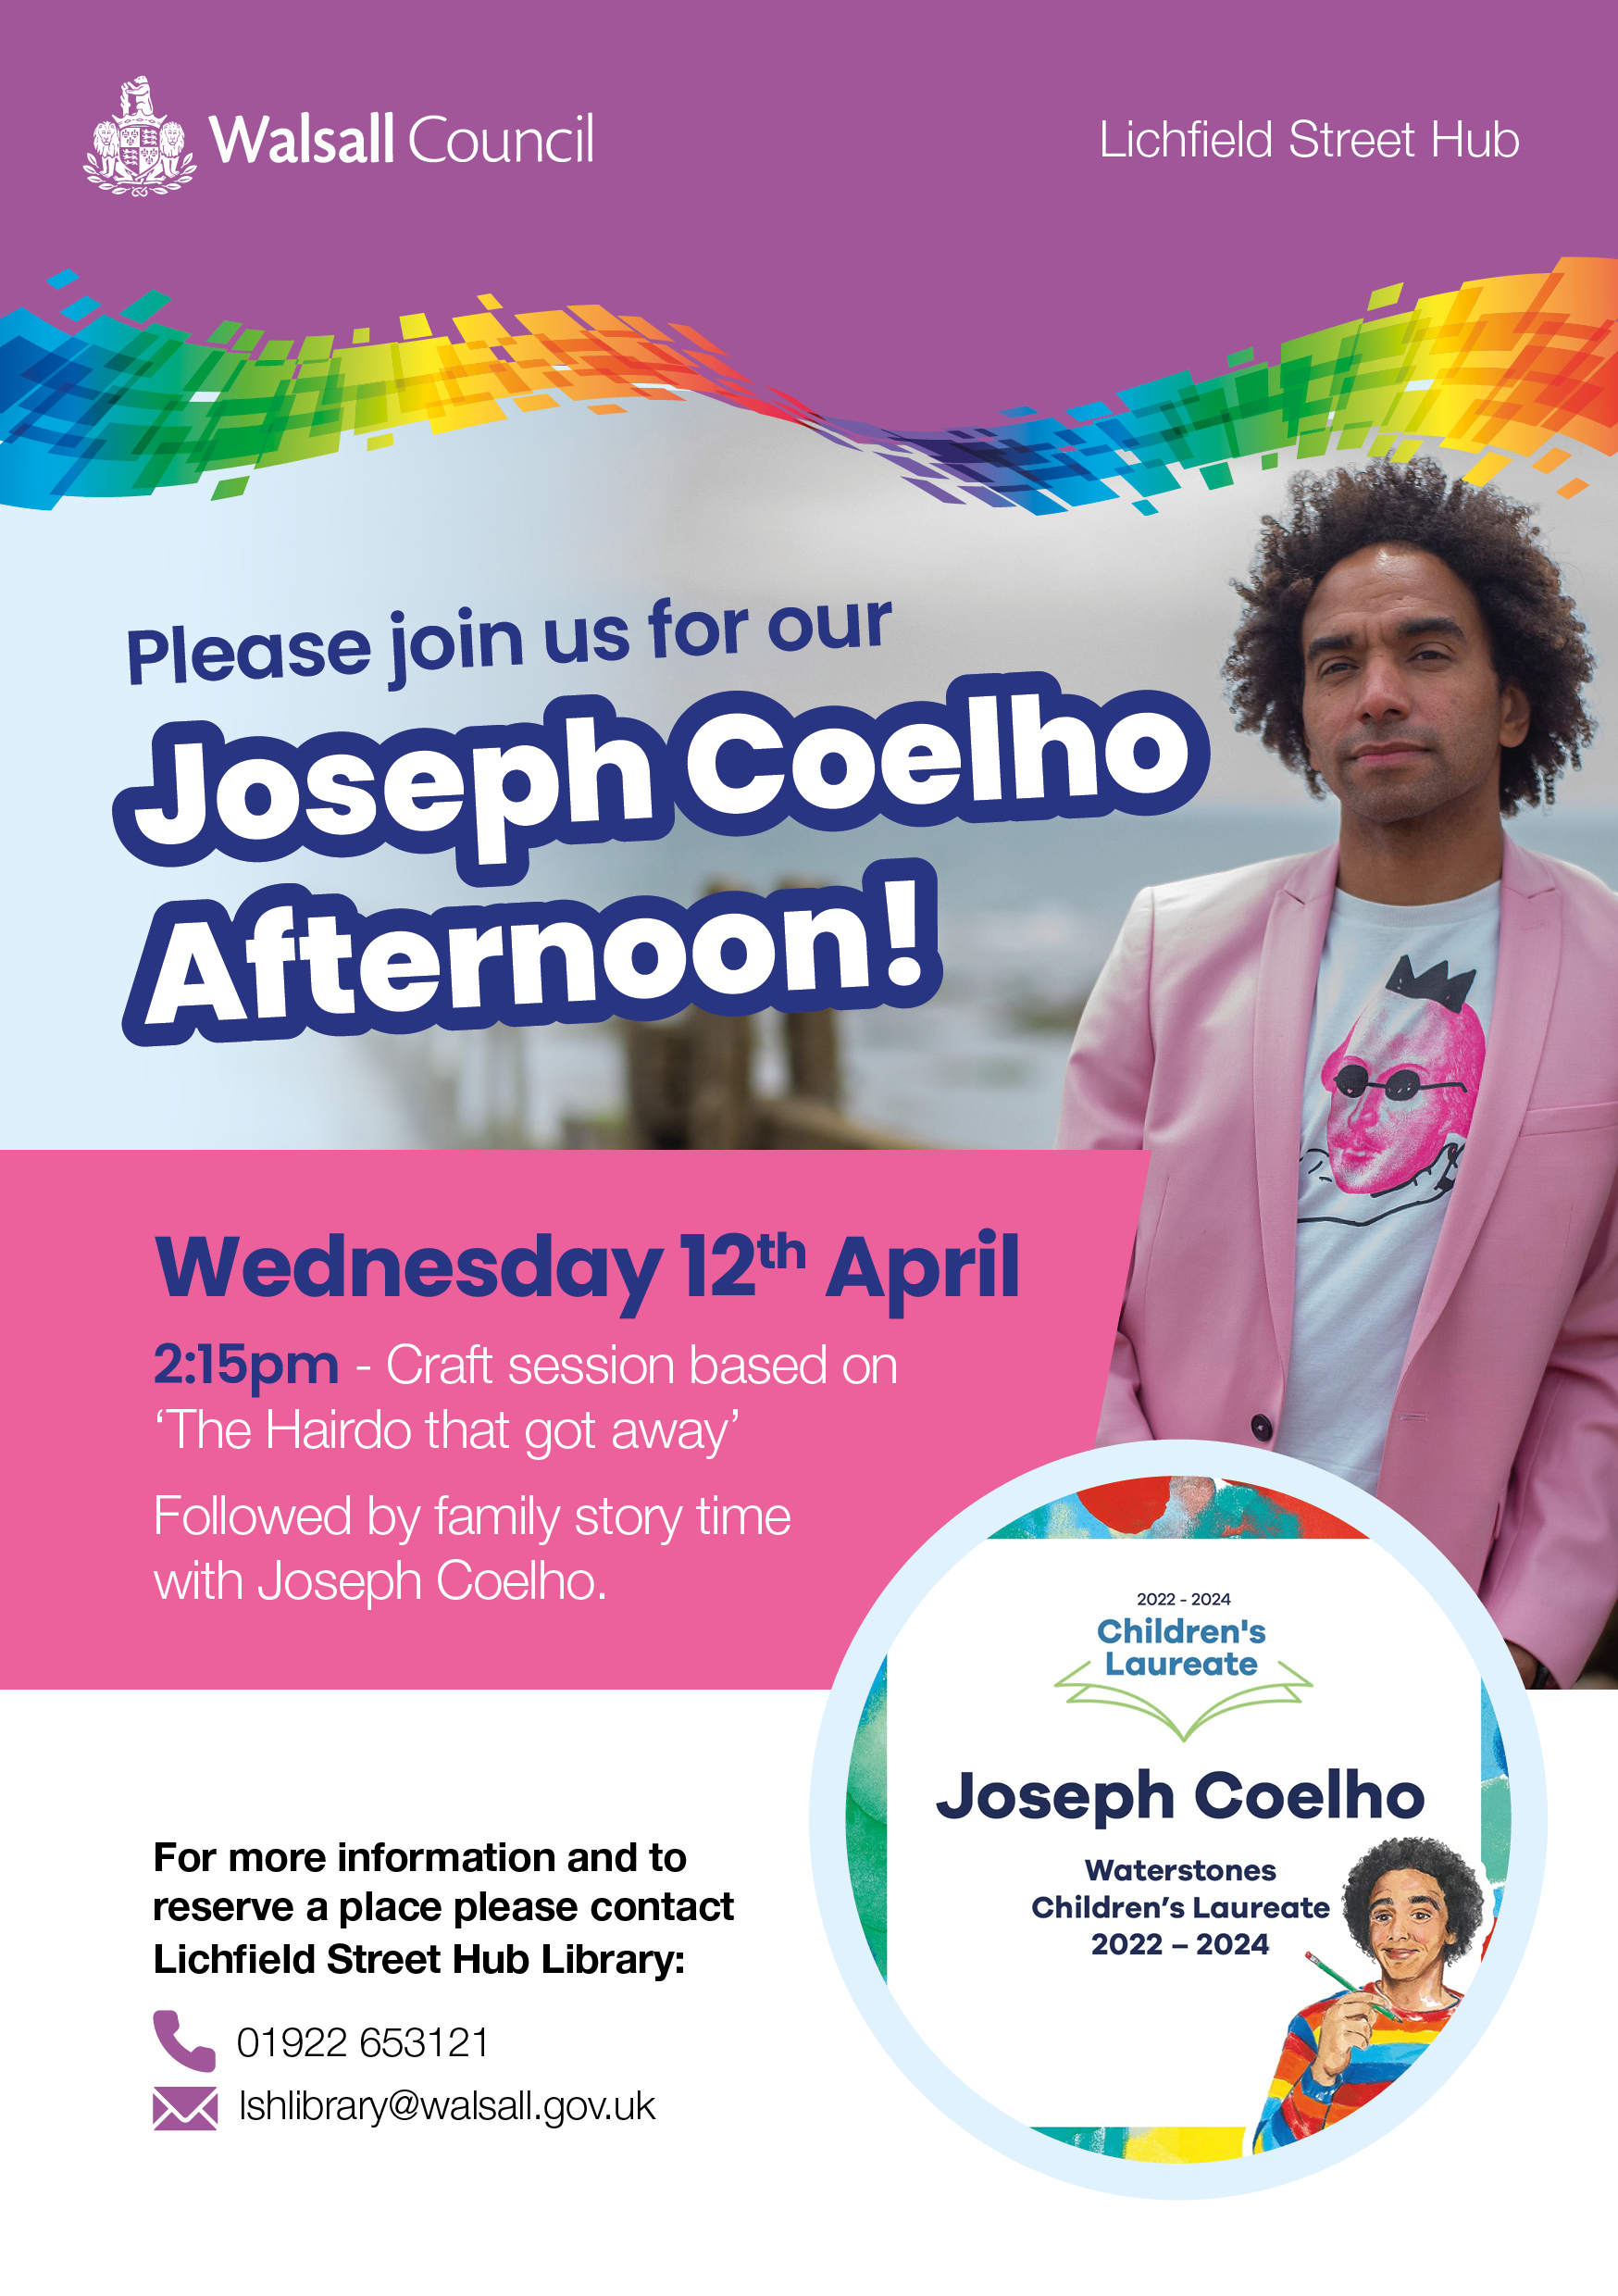 Image shows a promotional poster for a children's laureate event with Joseph Coelho, Wednesday 12 April at 2:15pm at Lichfield Street Hub Walsall